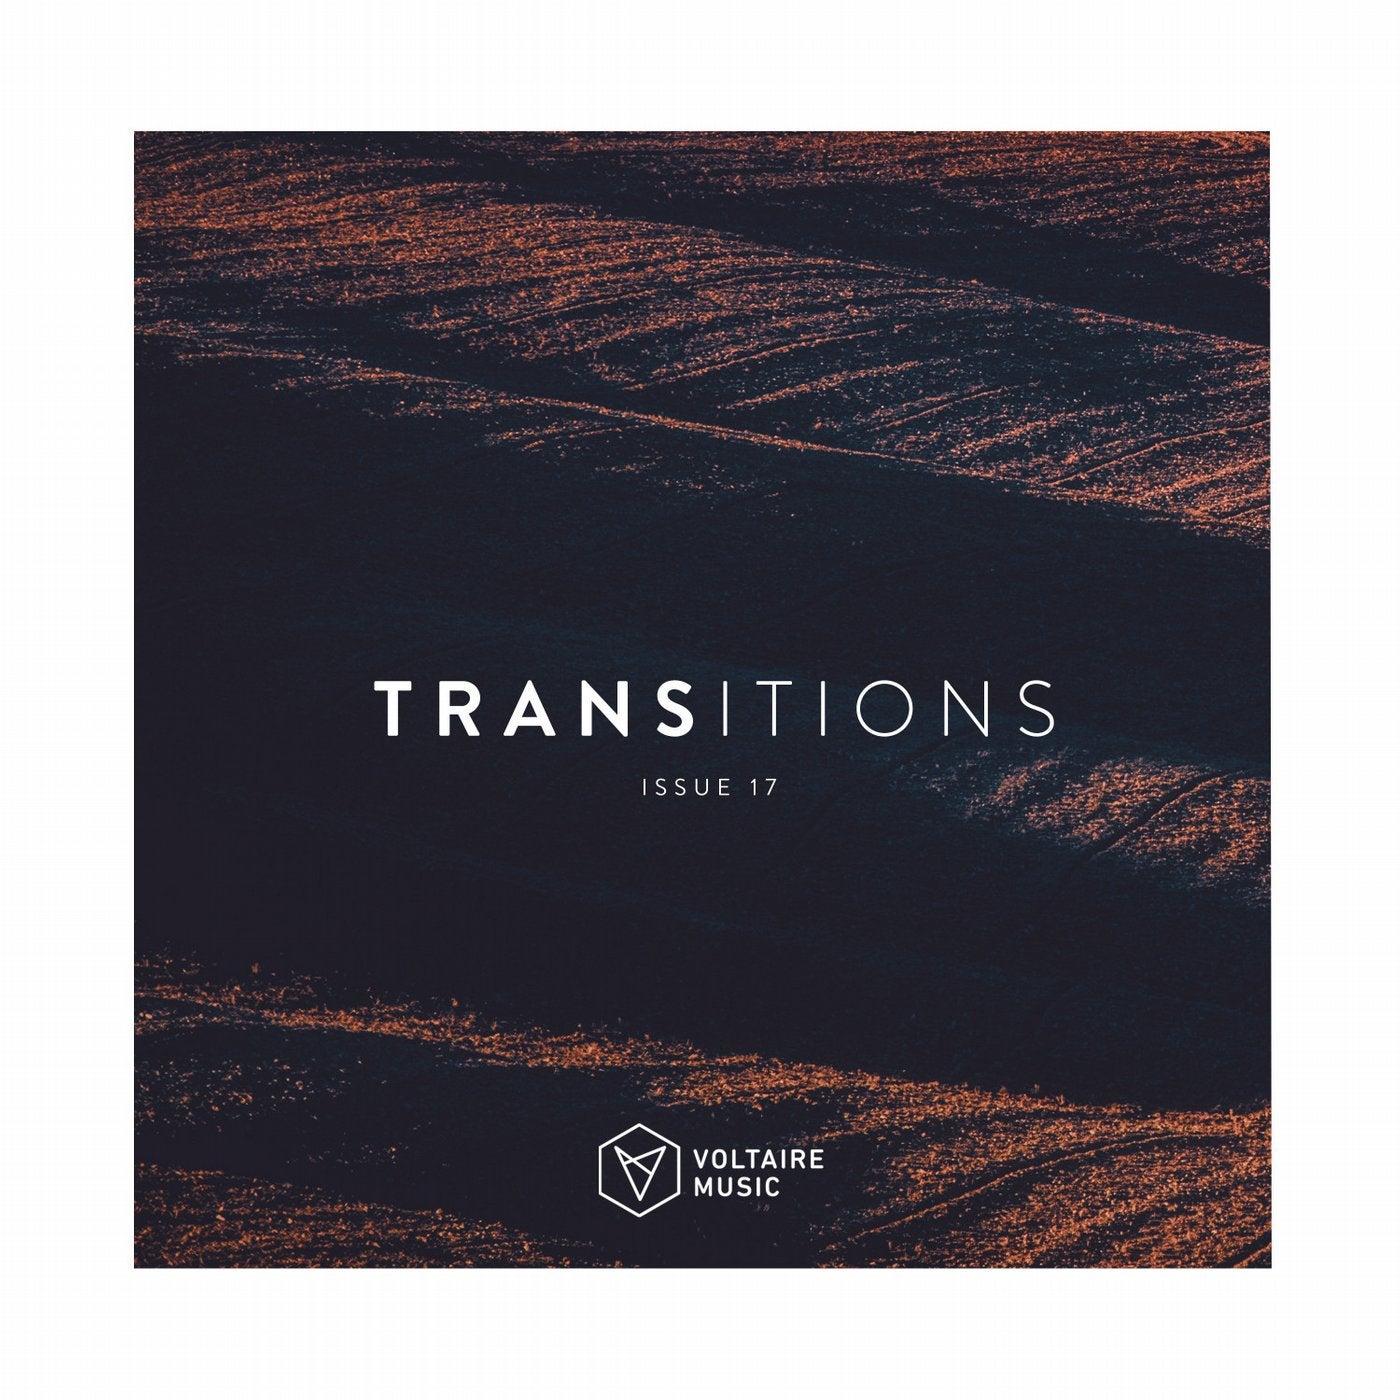 Transition Issue 17